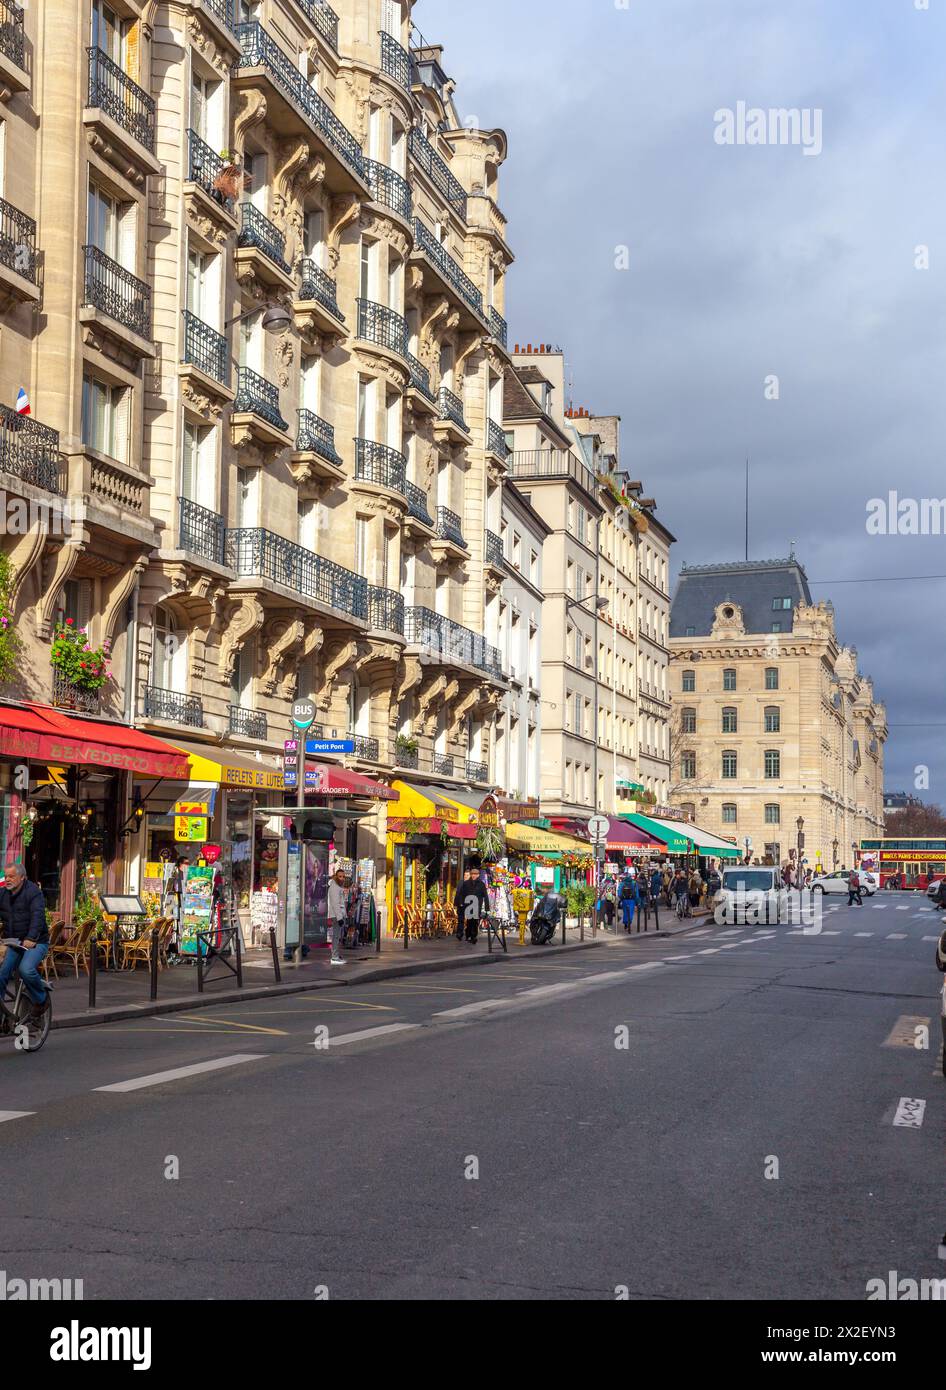 Bustling Parisian street life with classic architecture and sidewalk cafes. Stock Photo